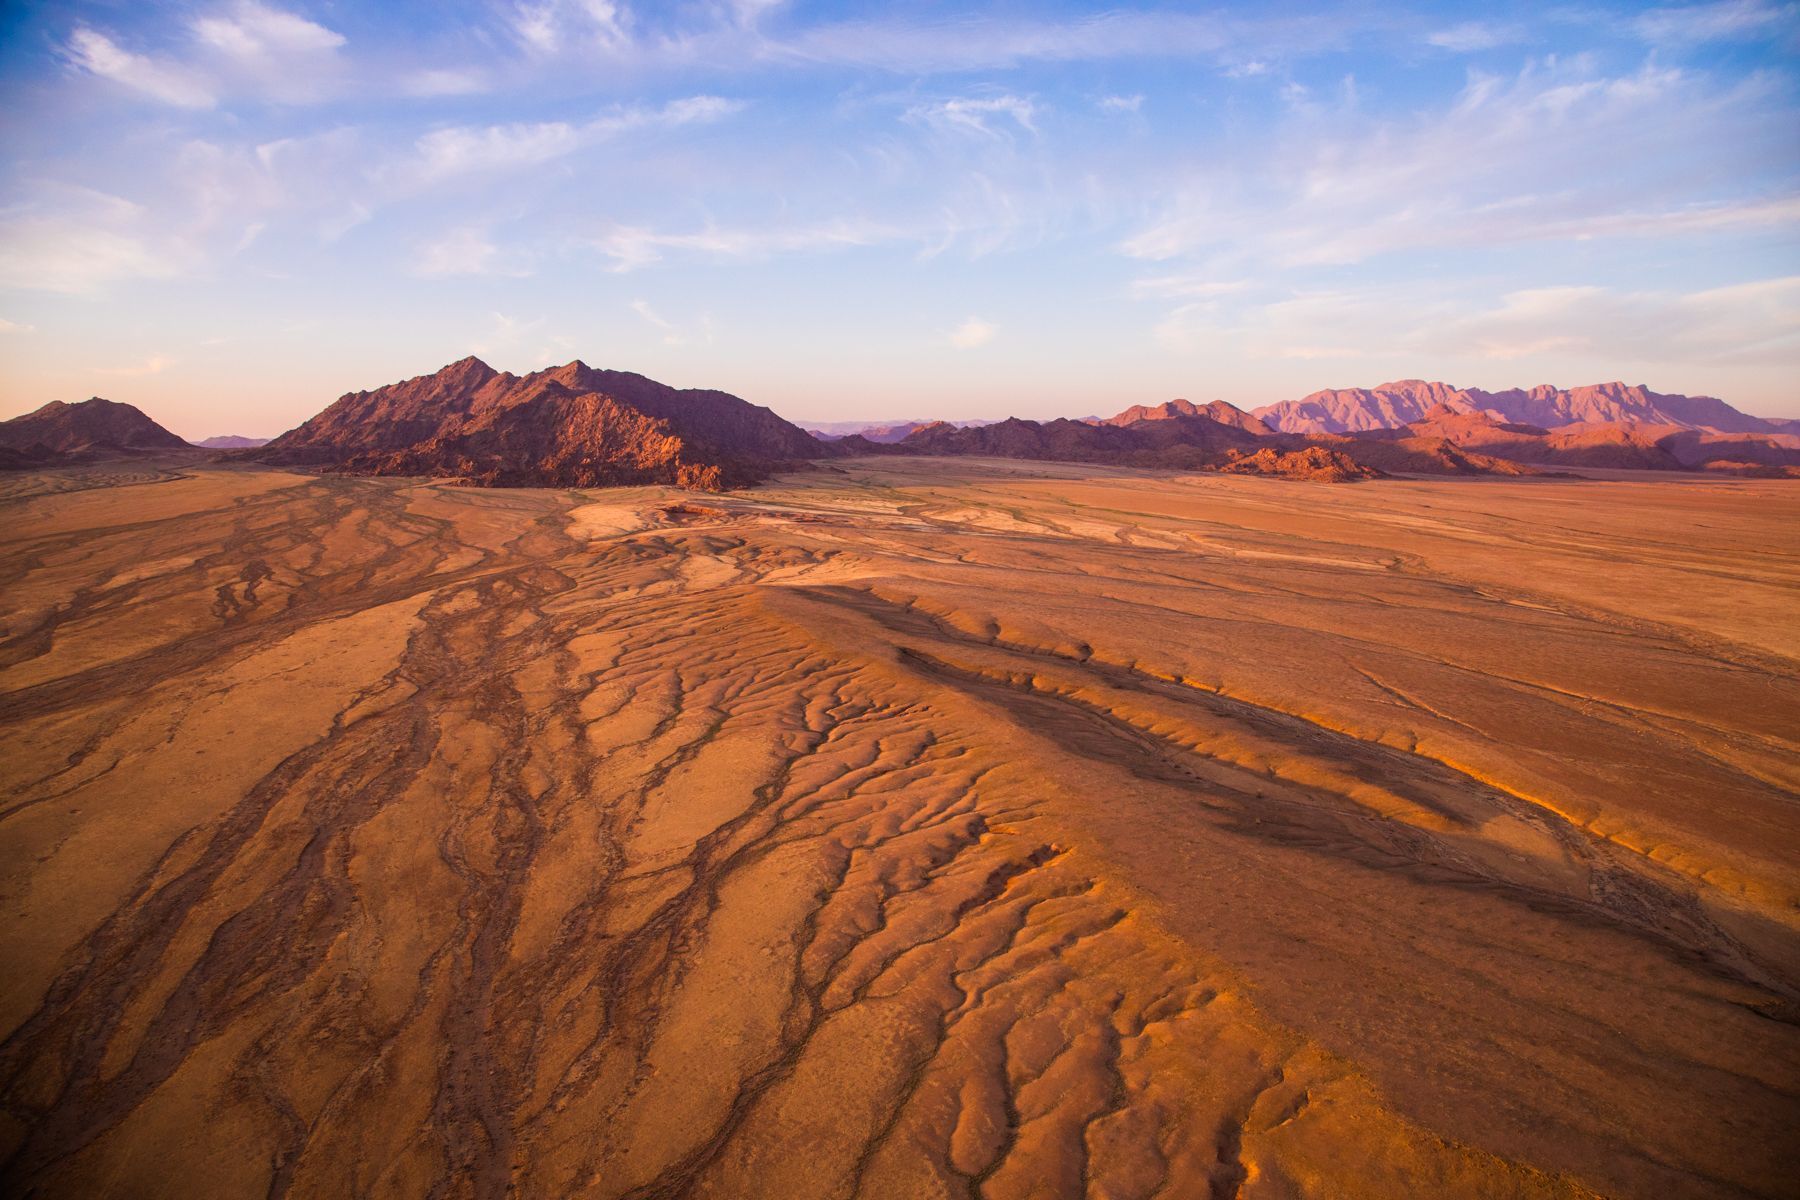 Aerial photography during our Namibia photo tour